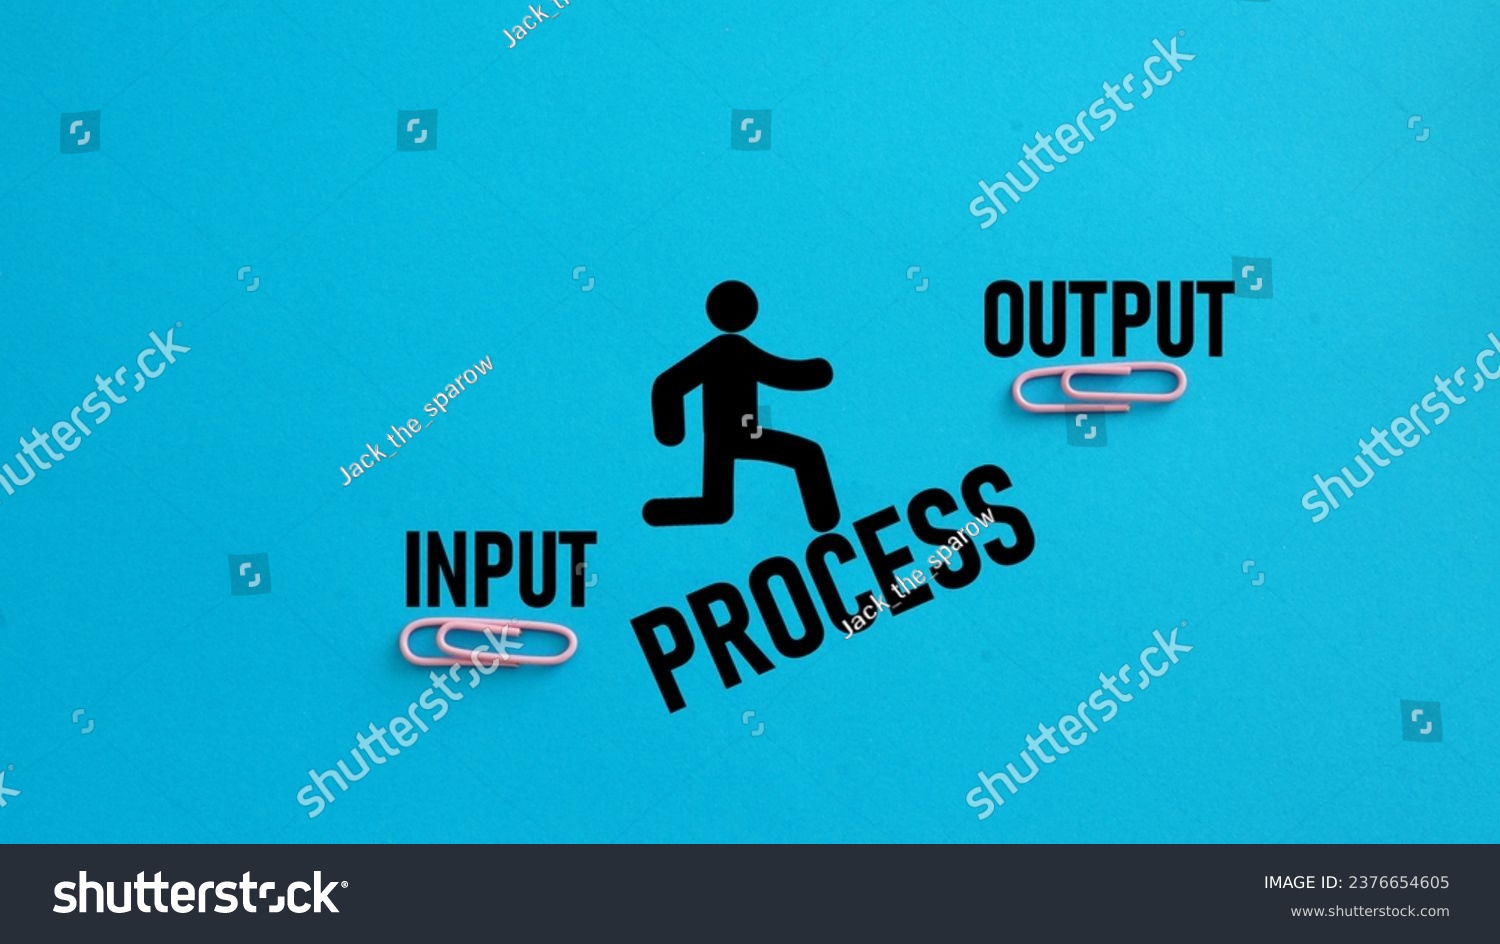 Flow of input and output with process . Input, output, outcome and impact. #2376654605